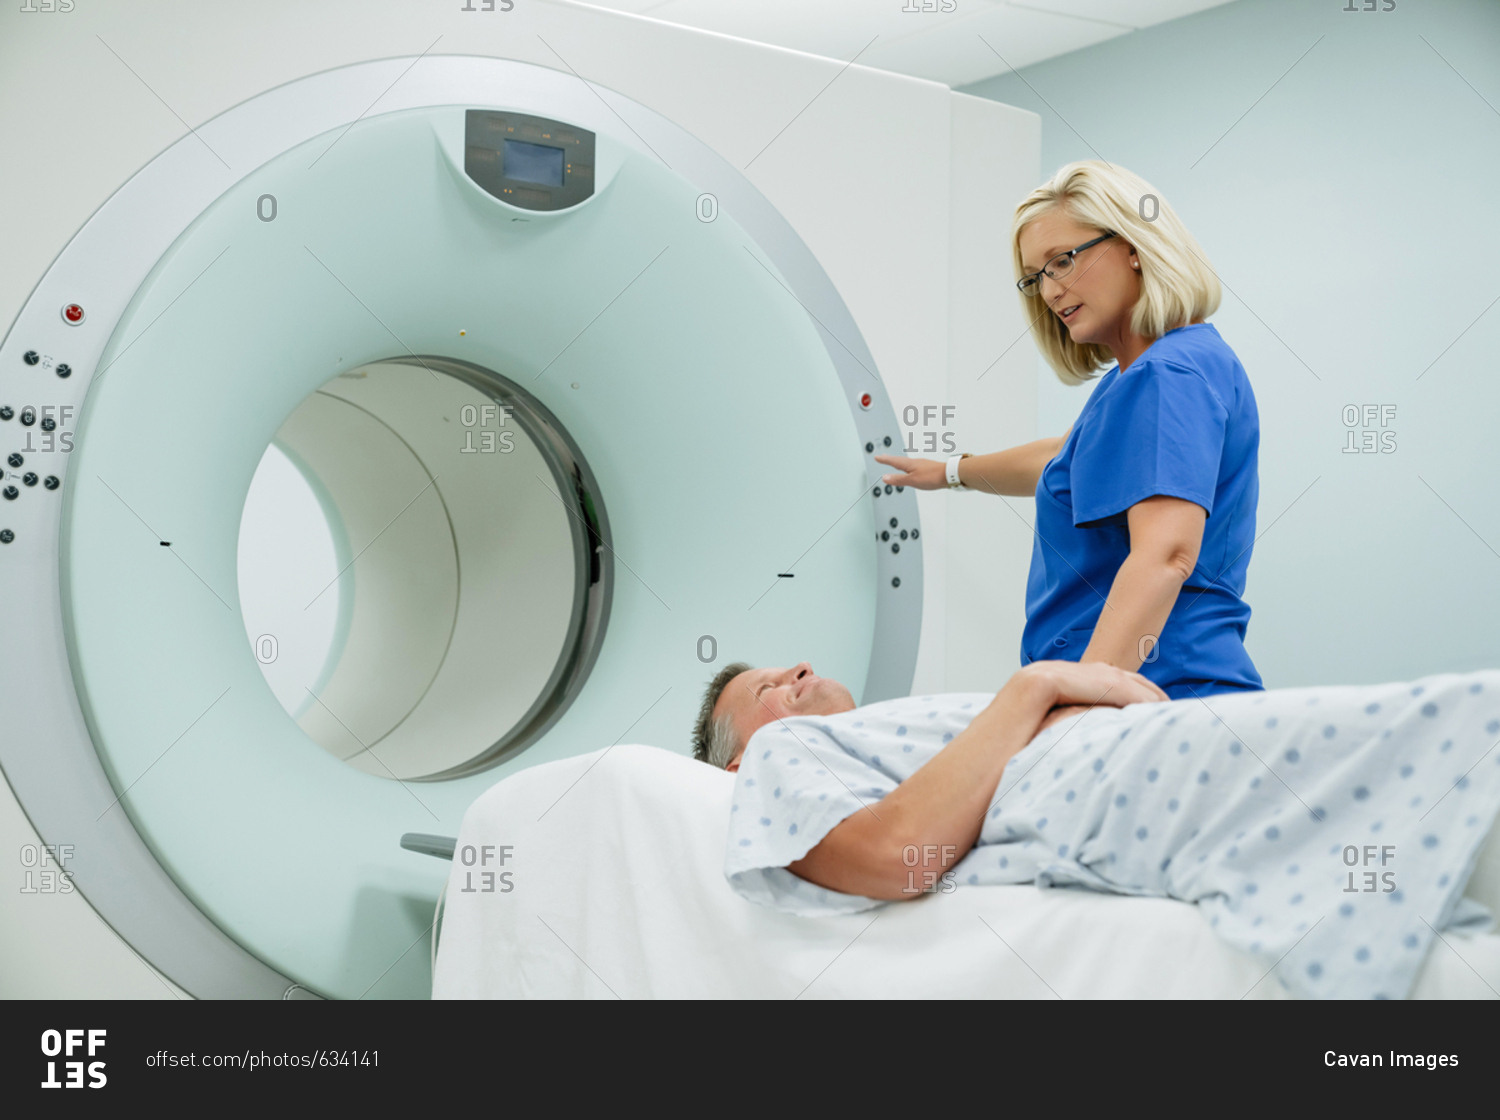 Nurse looking at patient lying on MRI Scanner while pressing start button in examination room